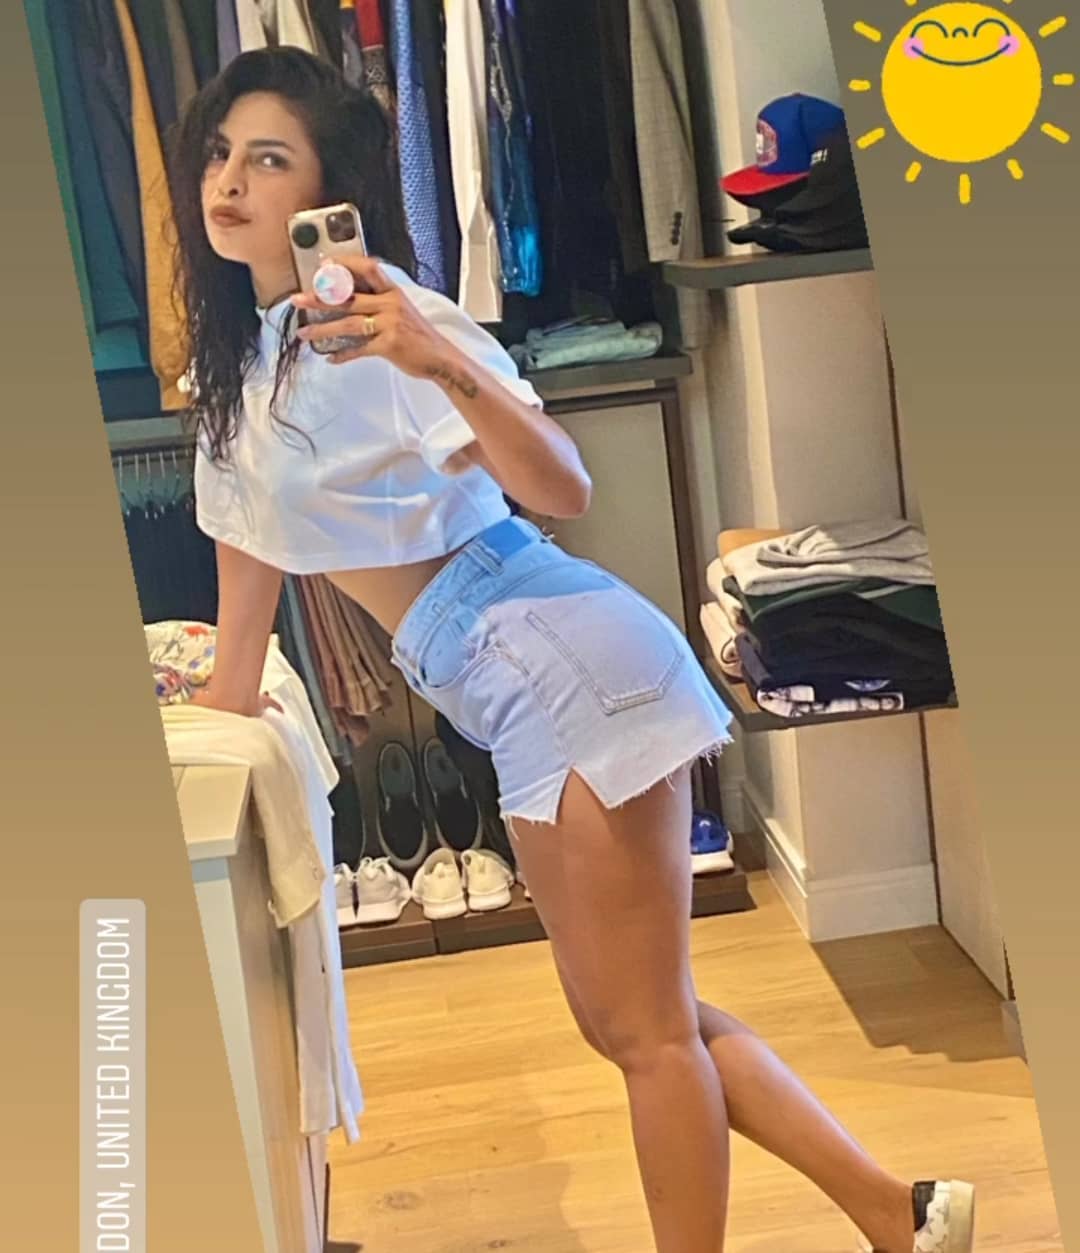  Priyanka Chopra's latest Instagram story is giving hot girl summer vibes. Scroll ahead as we roundup some of her hottest summer looks. (Image: Instagram)